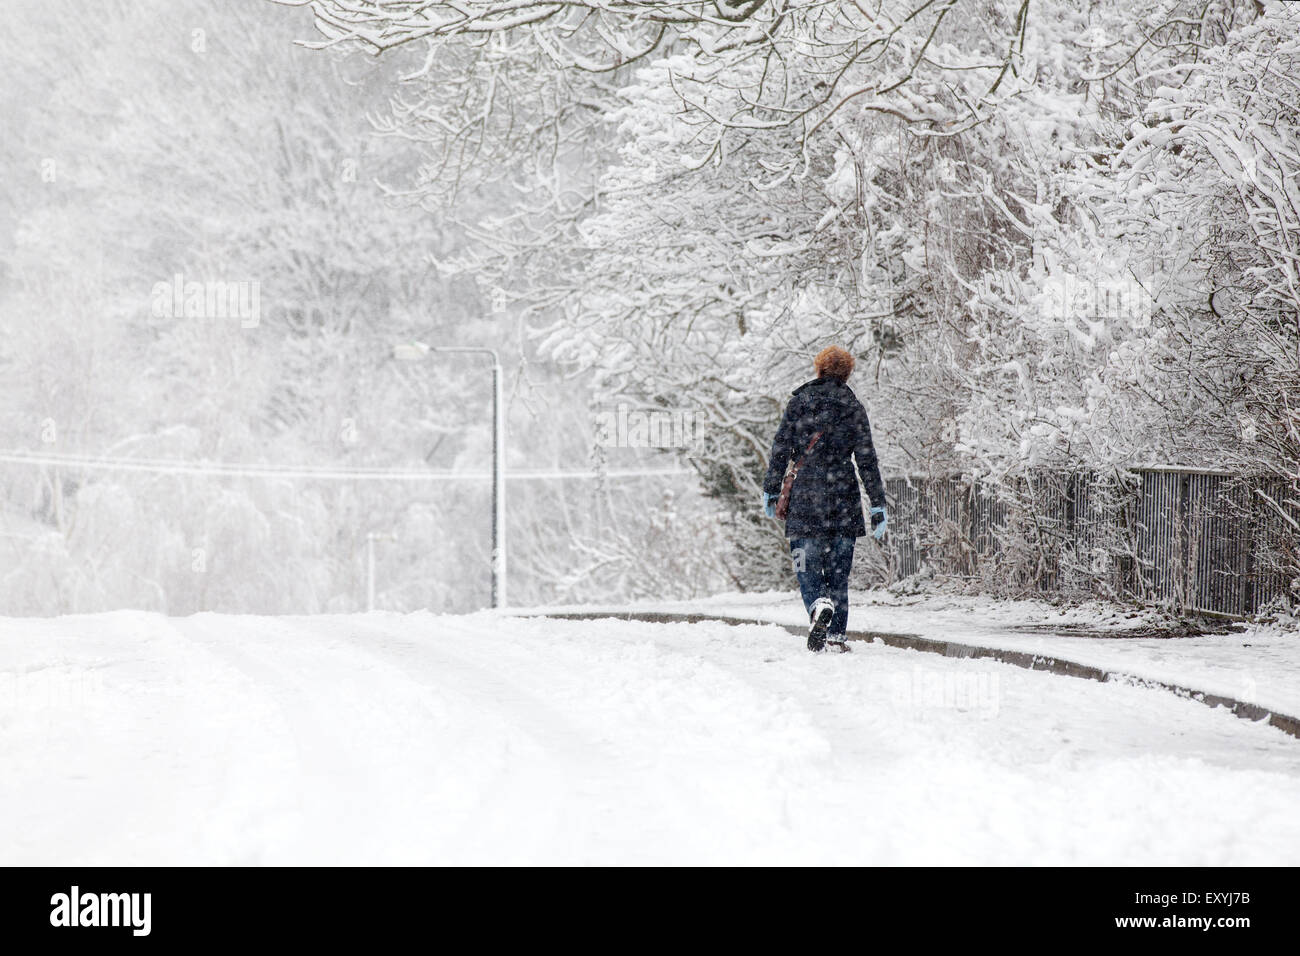 A woman walking along a snow covered suburban road through a snow blizzard. Using the road to gain some grip as the footpath is frozen and slippery Stock Photo